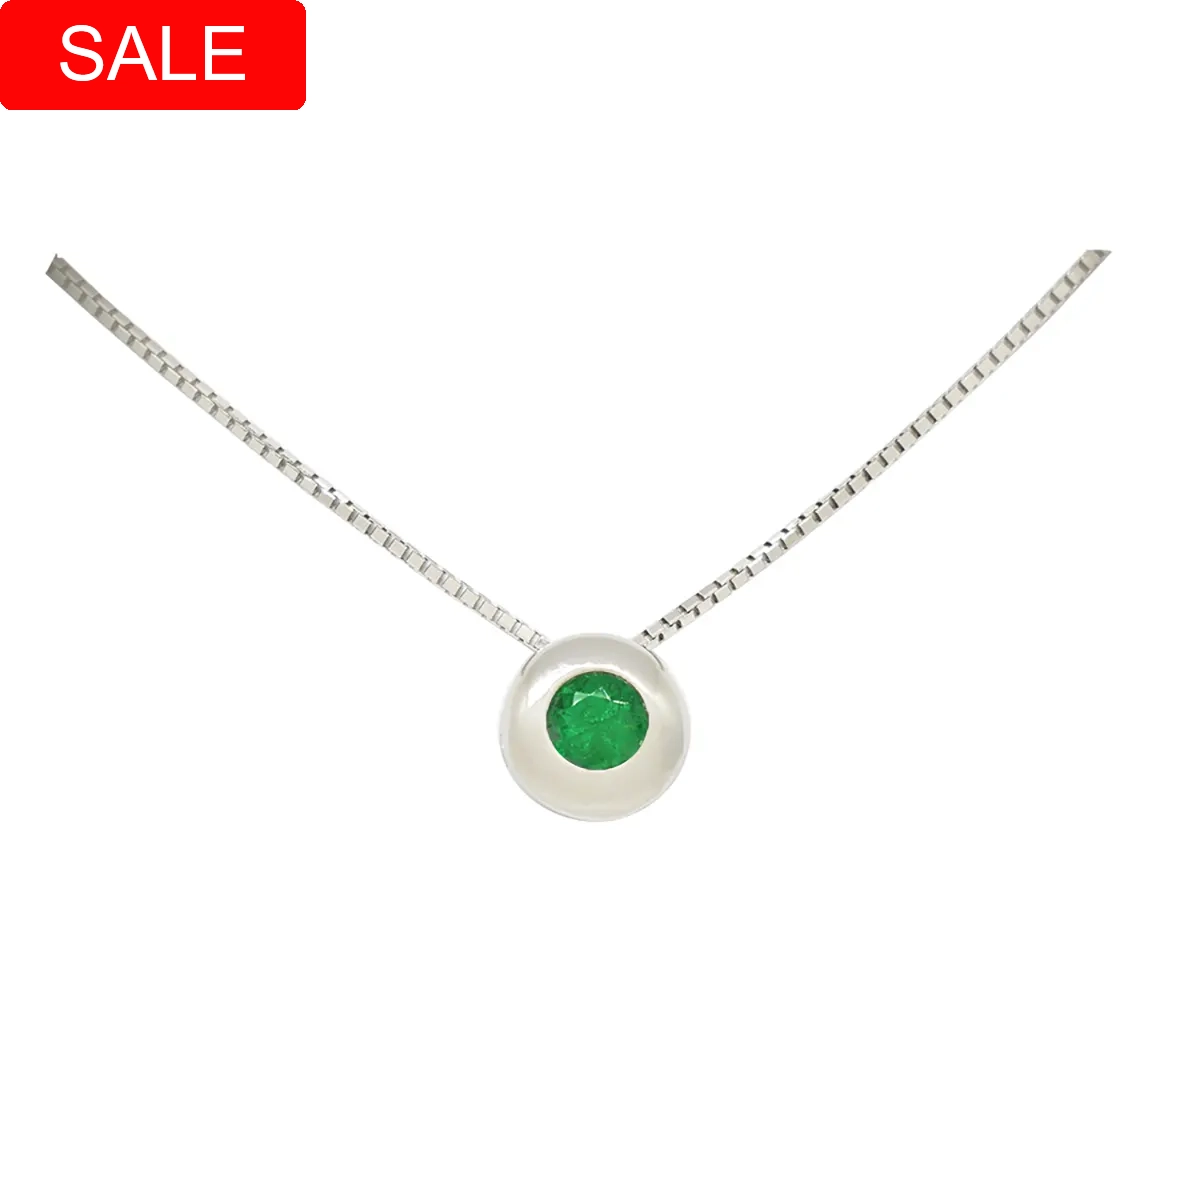 Small emerald necklace with a circular shape custom made in 18K white gold with a 0.25 Ct. round cut green natural emerald